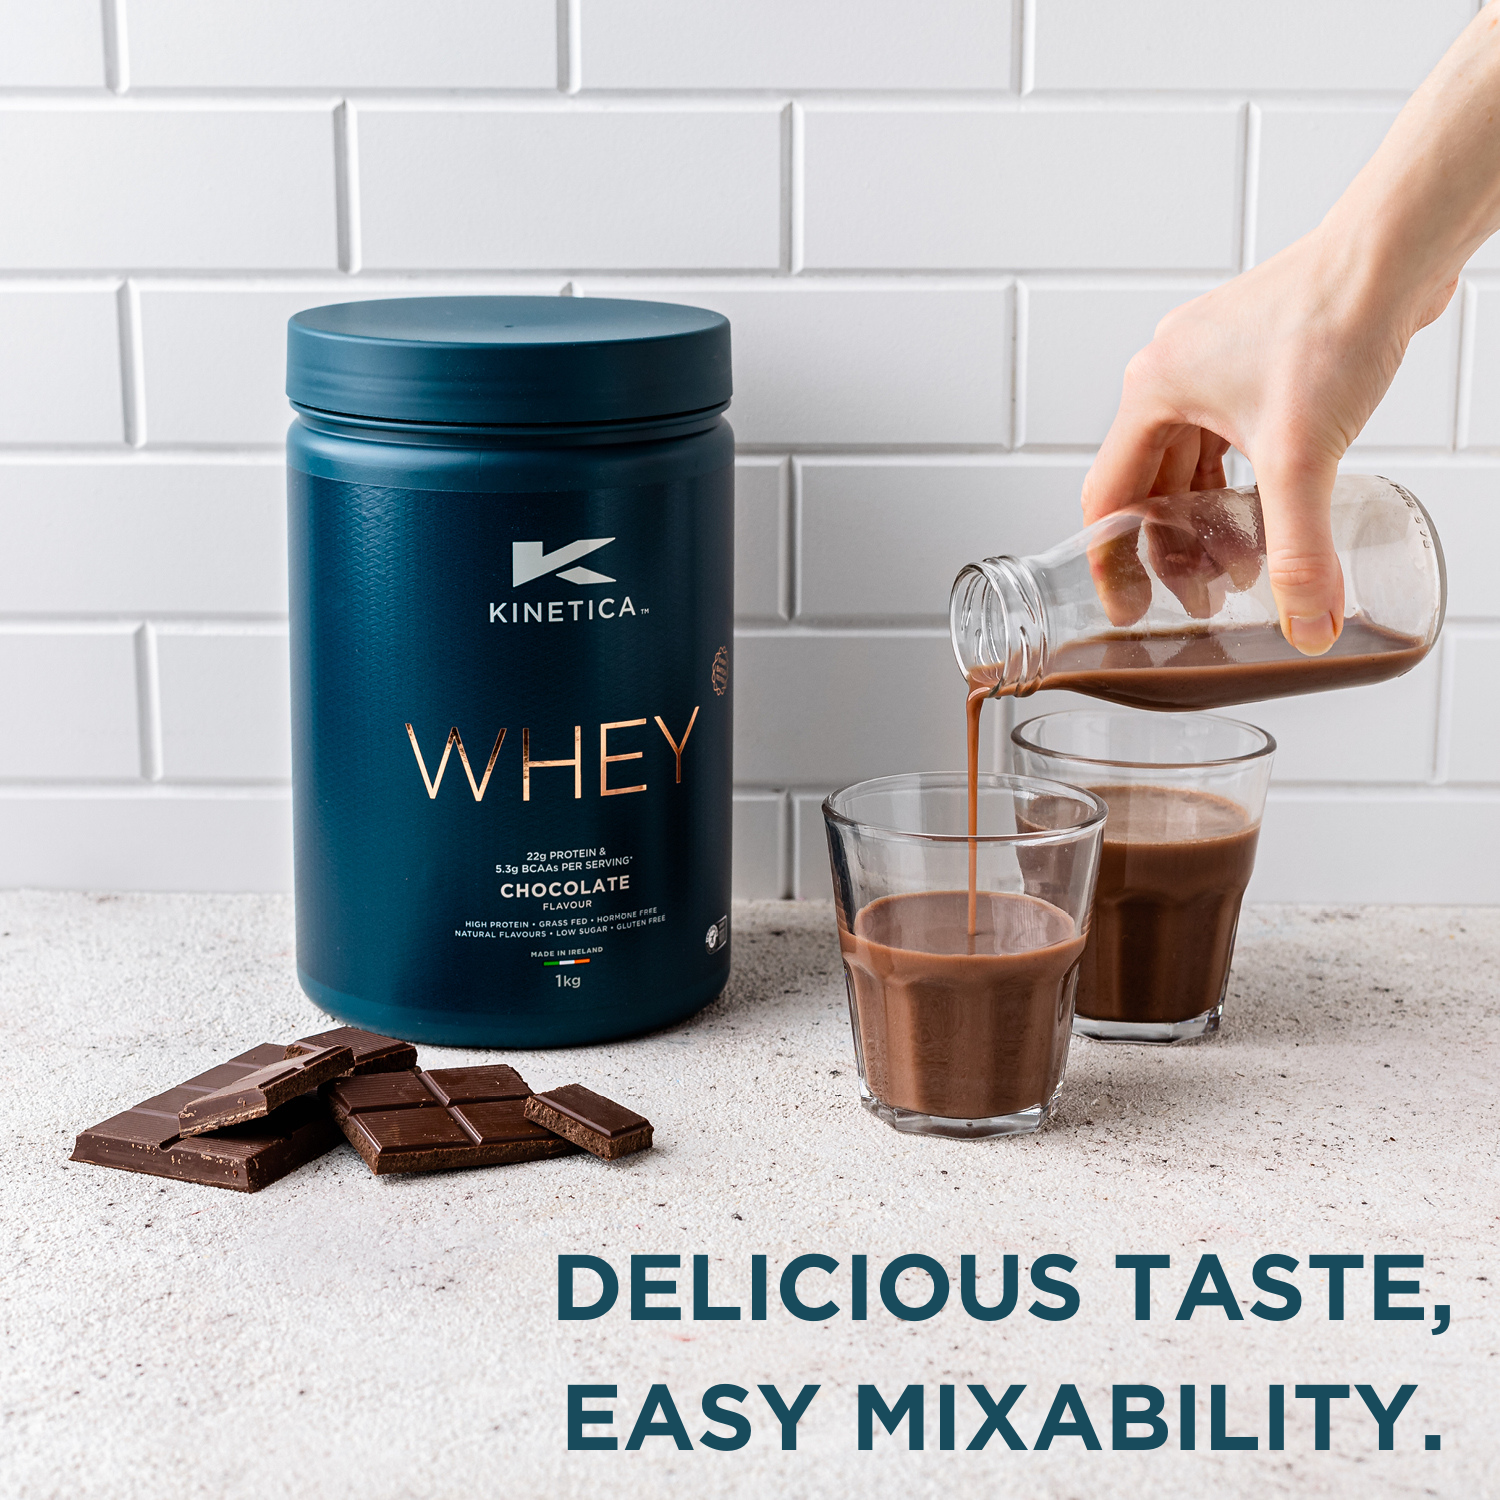 Whey protein powder, chocolate protein powder, trusted by professional athletes, WADA tested, delicious taste, easy mixability